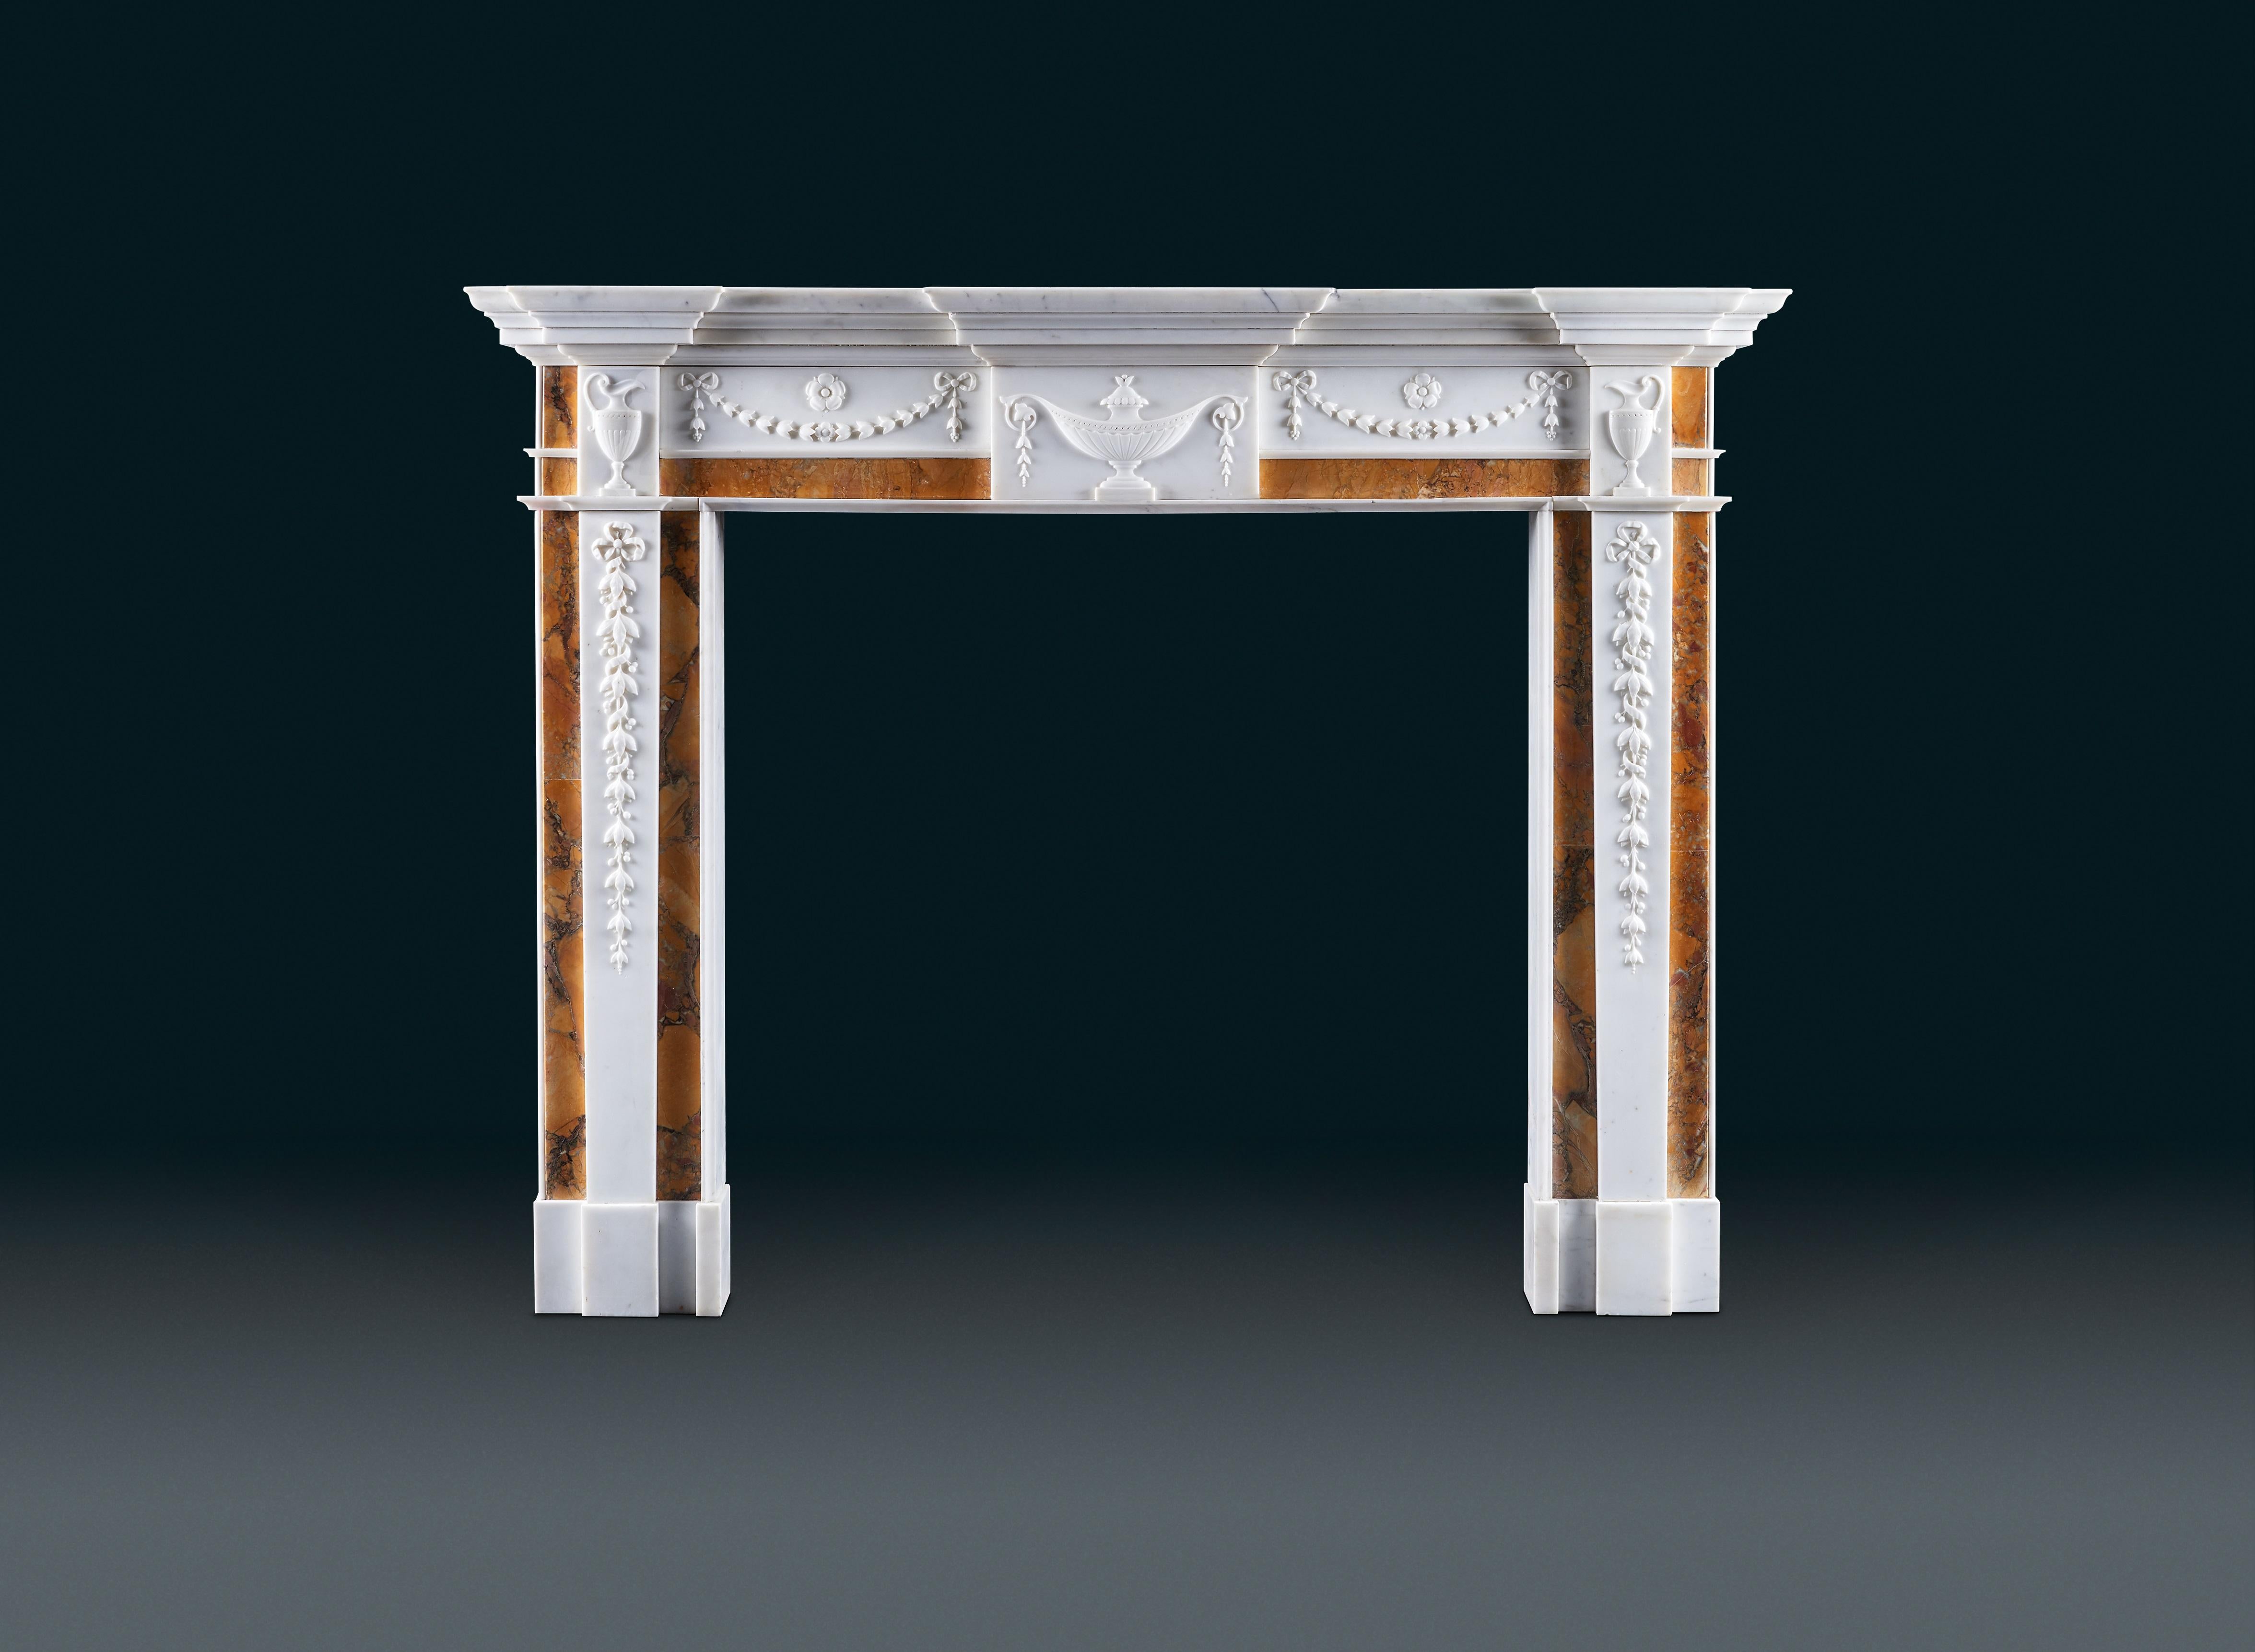 A late George III, Irish neoclassical antique chimneypiece of Siena and statuary marbles. The breakfront moulded shelf above the frieze which is decorated with a central tablet carved with a lidded tazza urn with scrolling handles, echoed by further